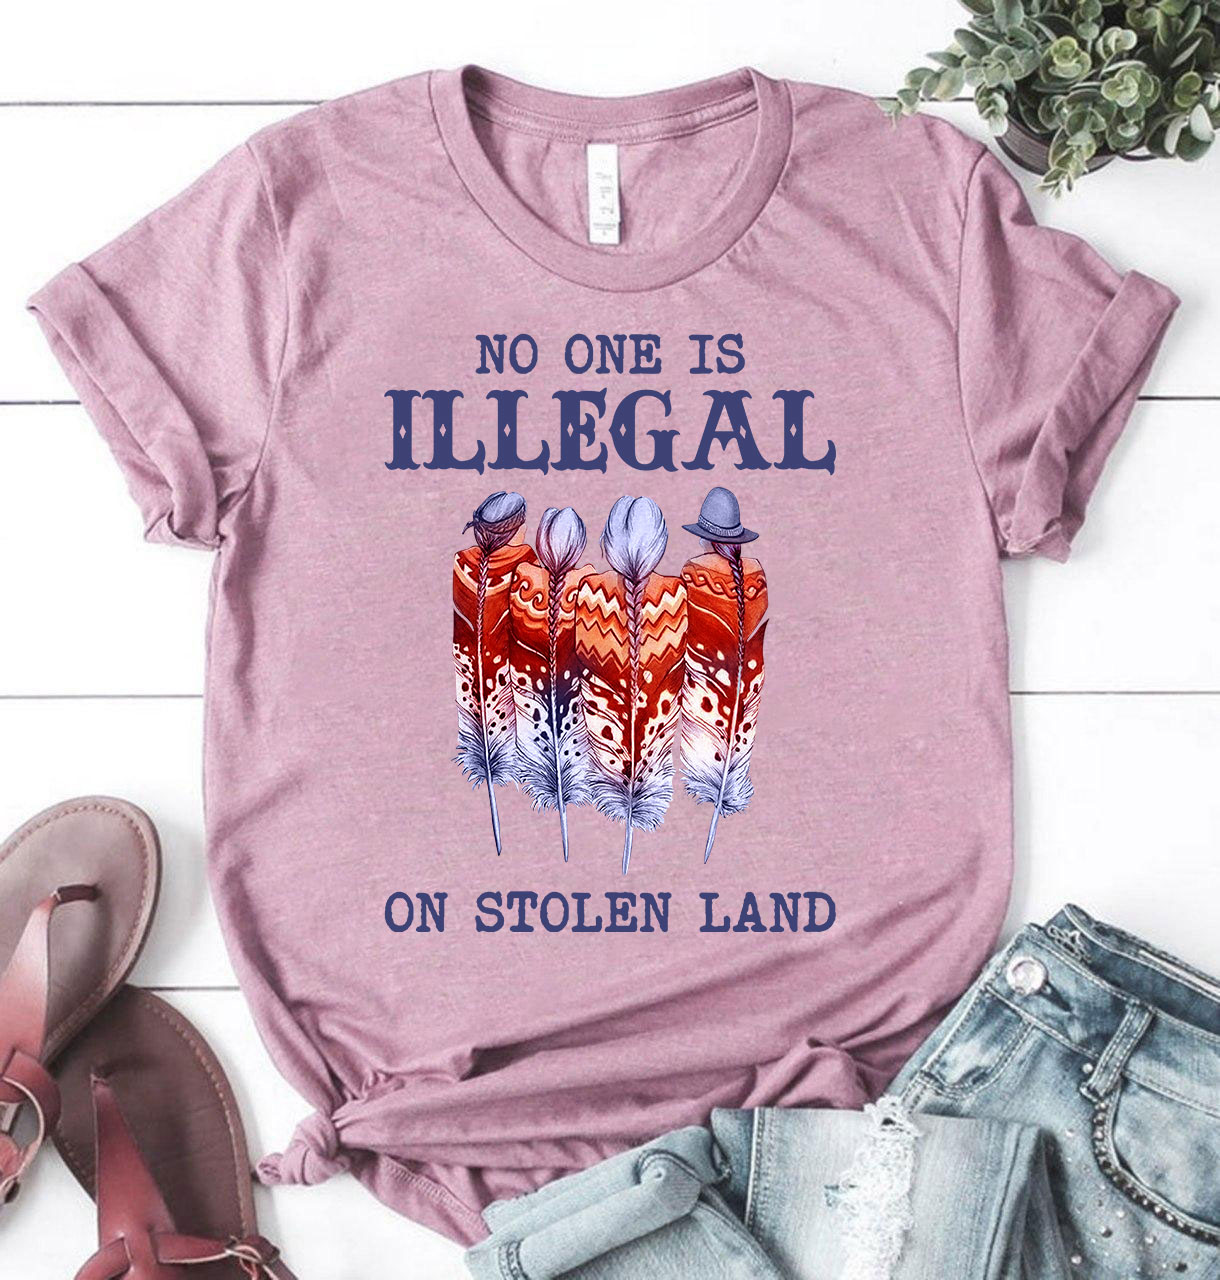 No one is illegal on stolen land - Native america